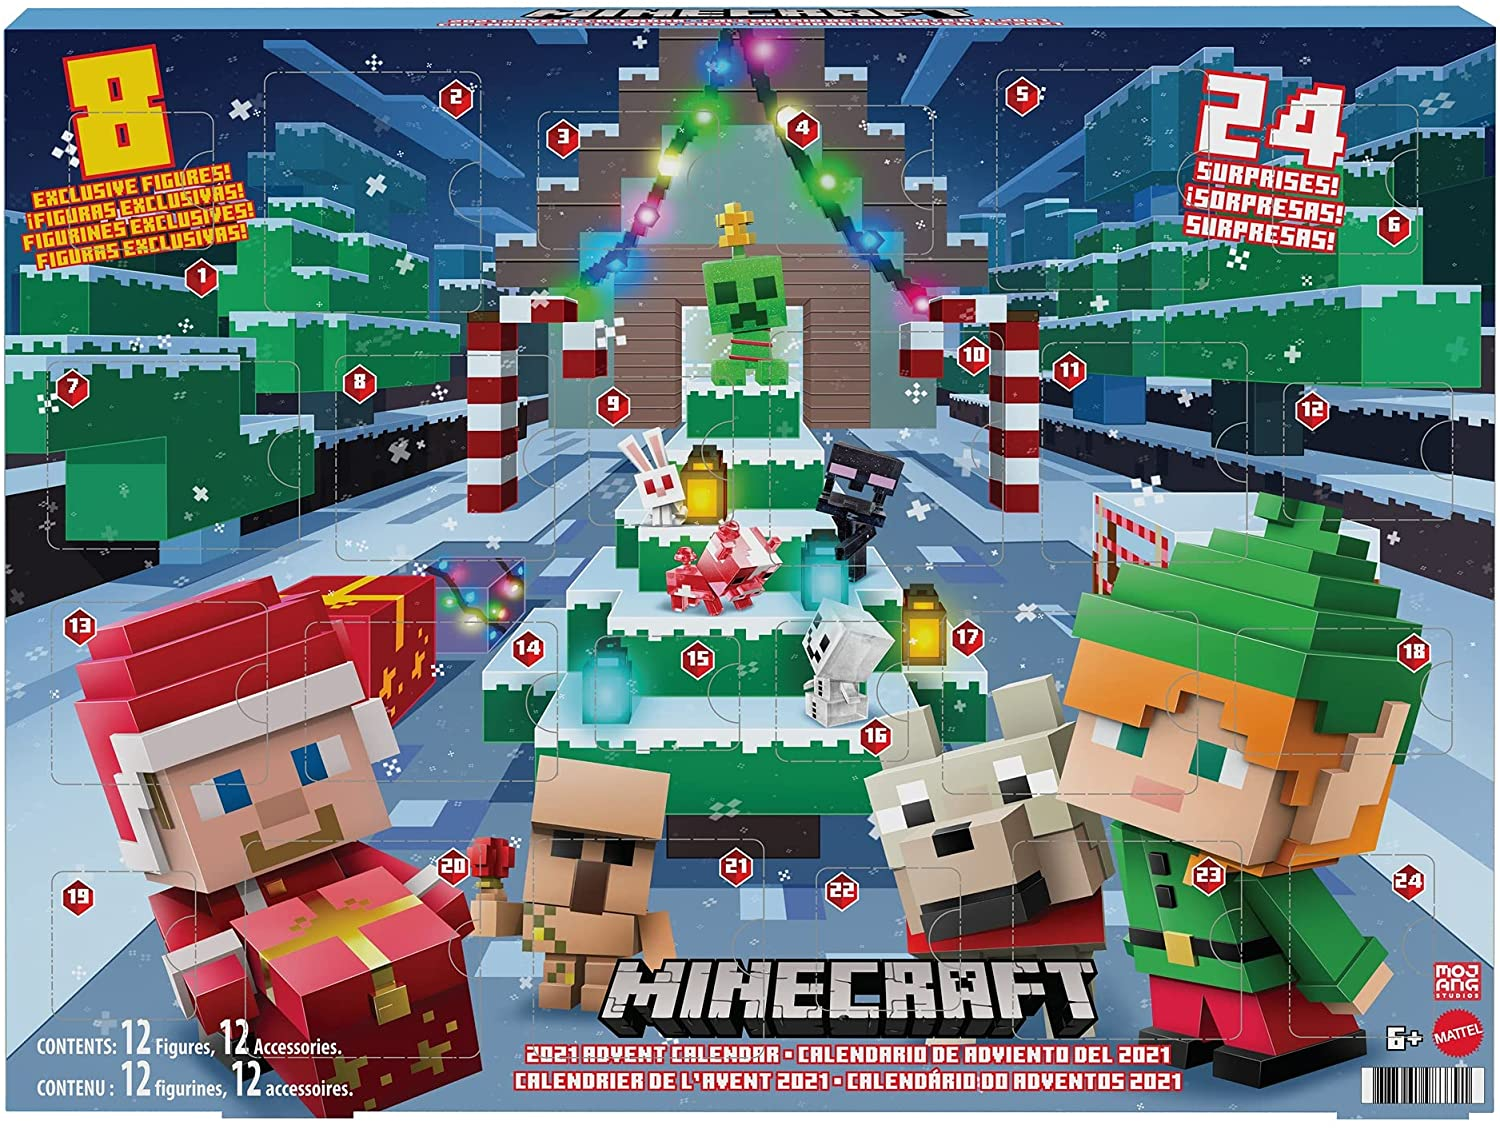 Minecraft 2021 Advent Calendar Available Now For Preorder + Spoilers! -  Hello Subscription